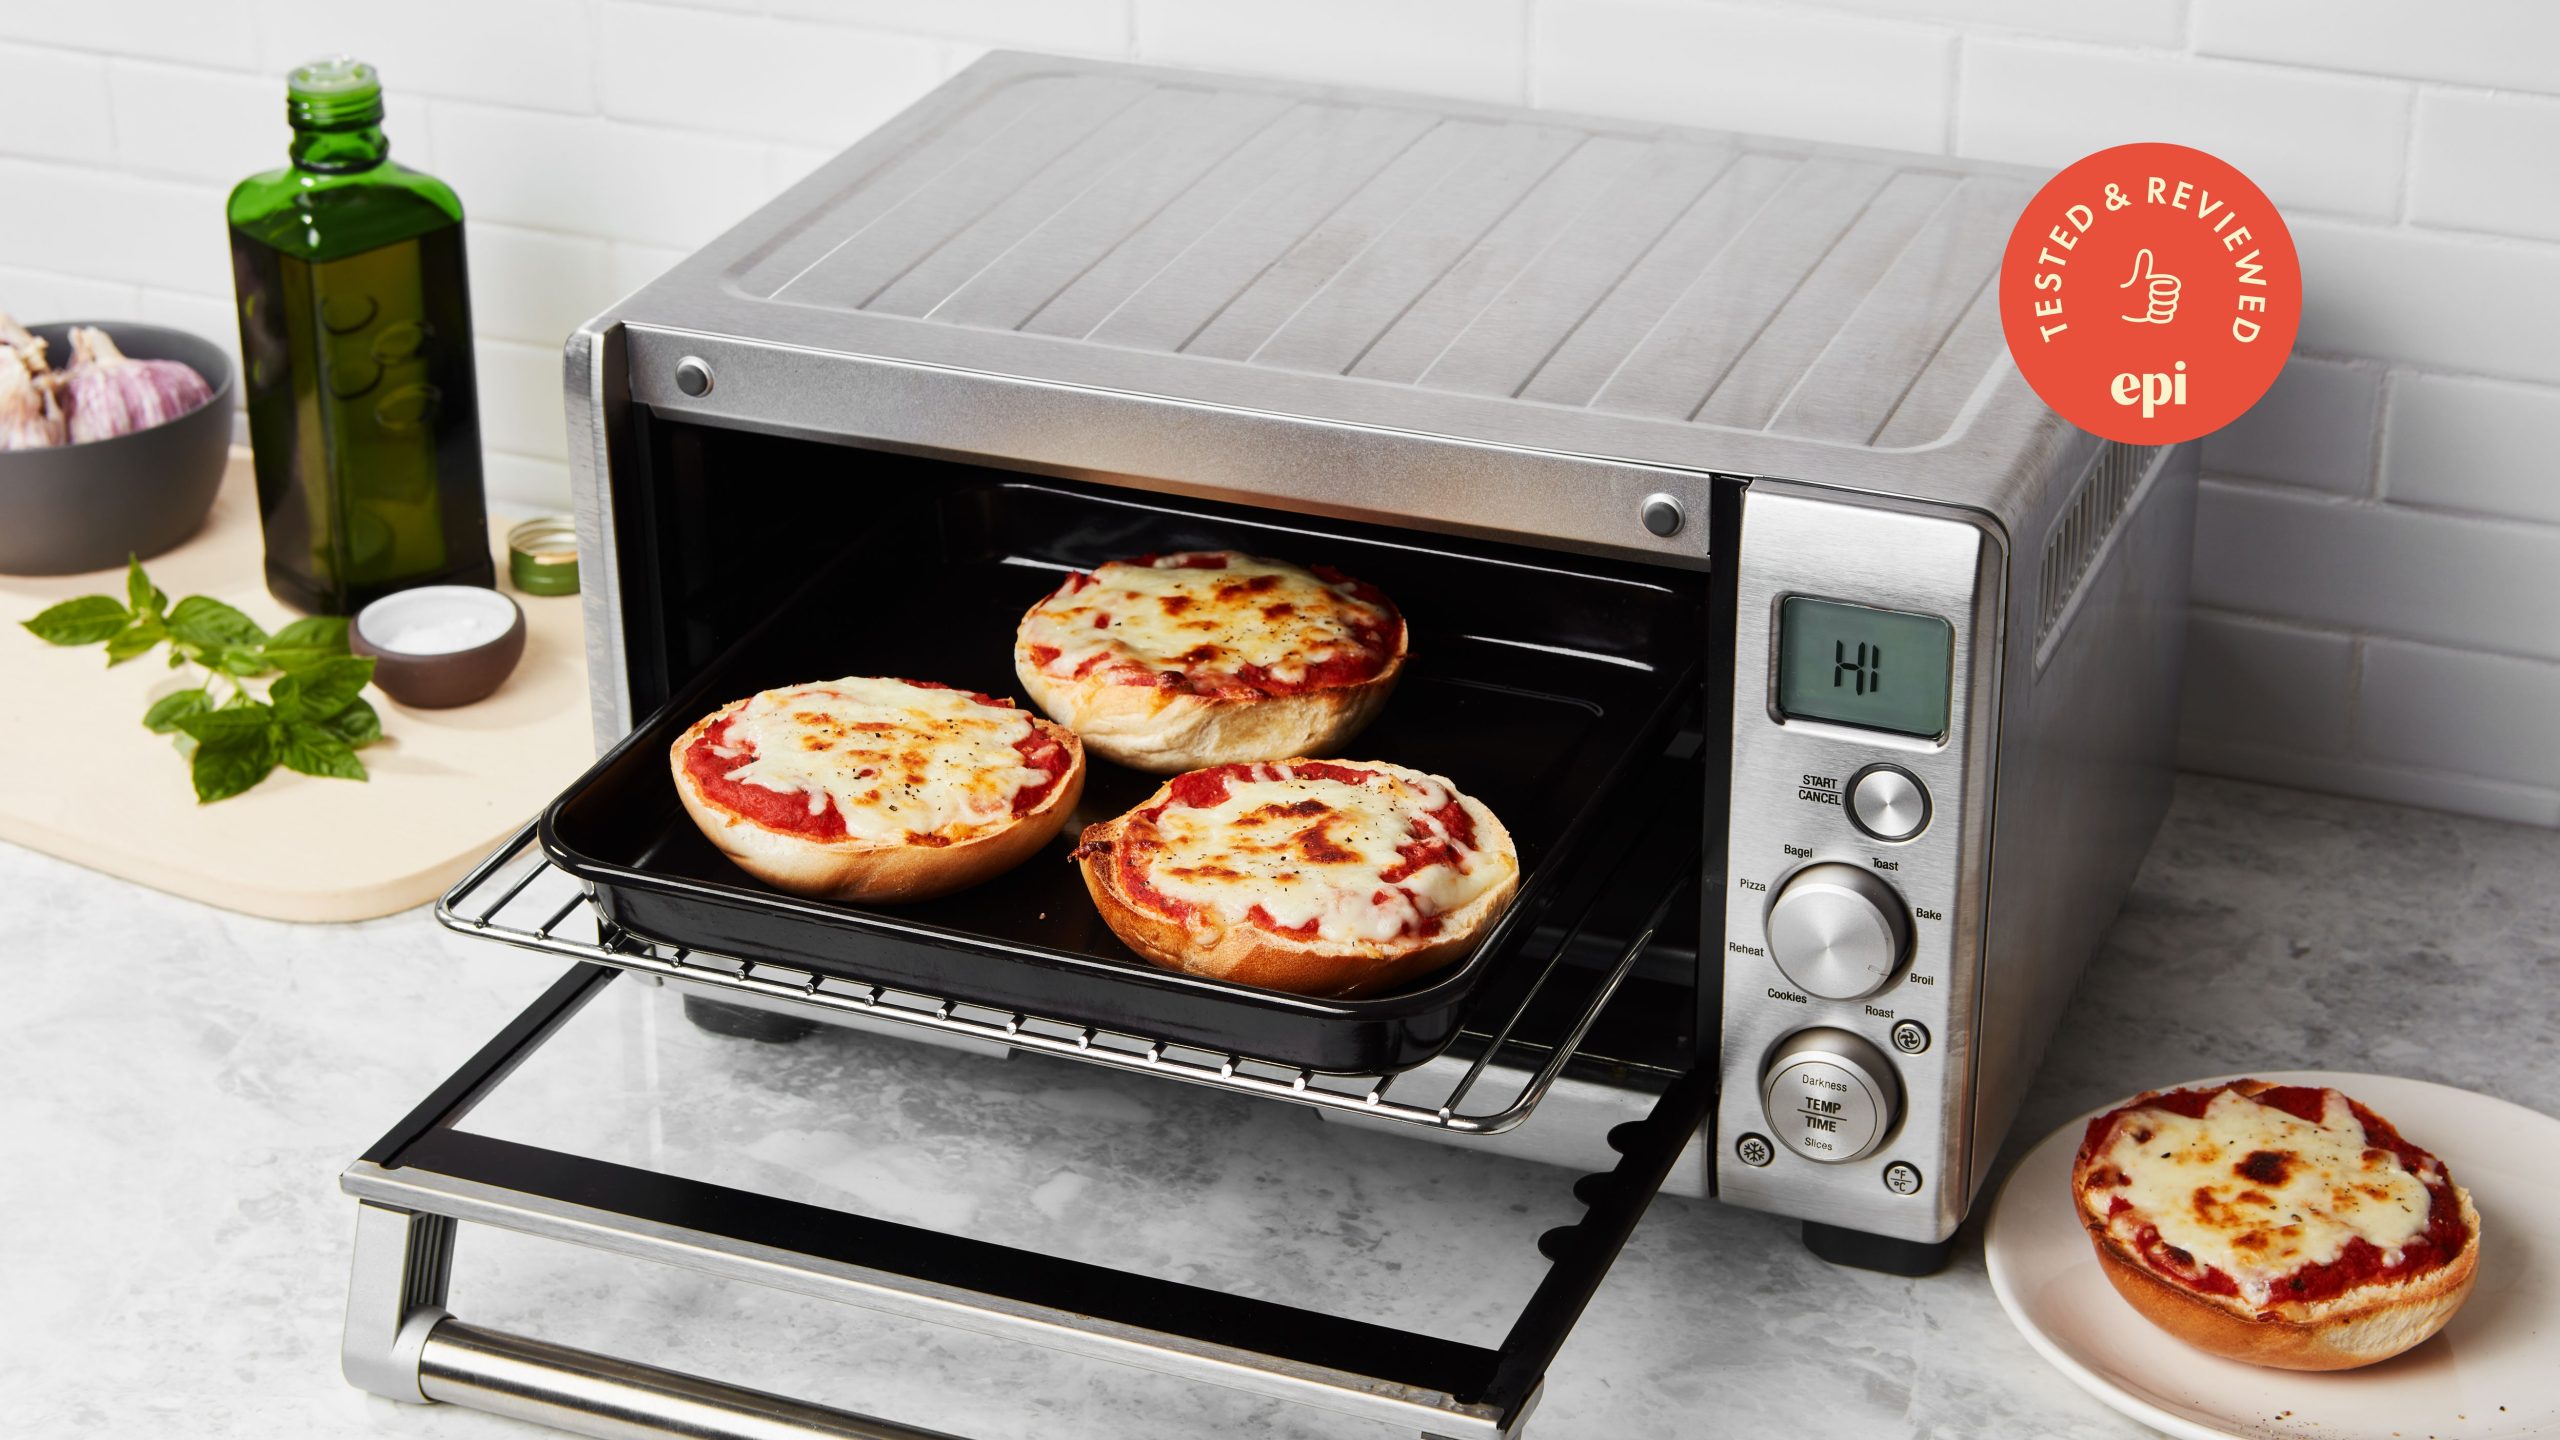 How To Perfectly Toast A Bagel In A Toaster Oven: A Foolproof Guide!